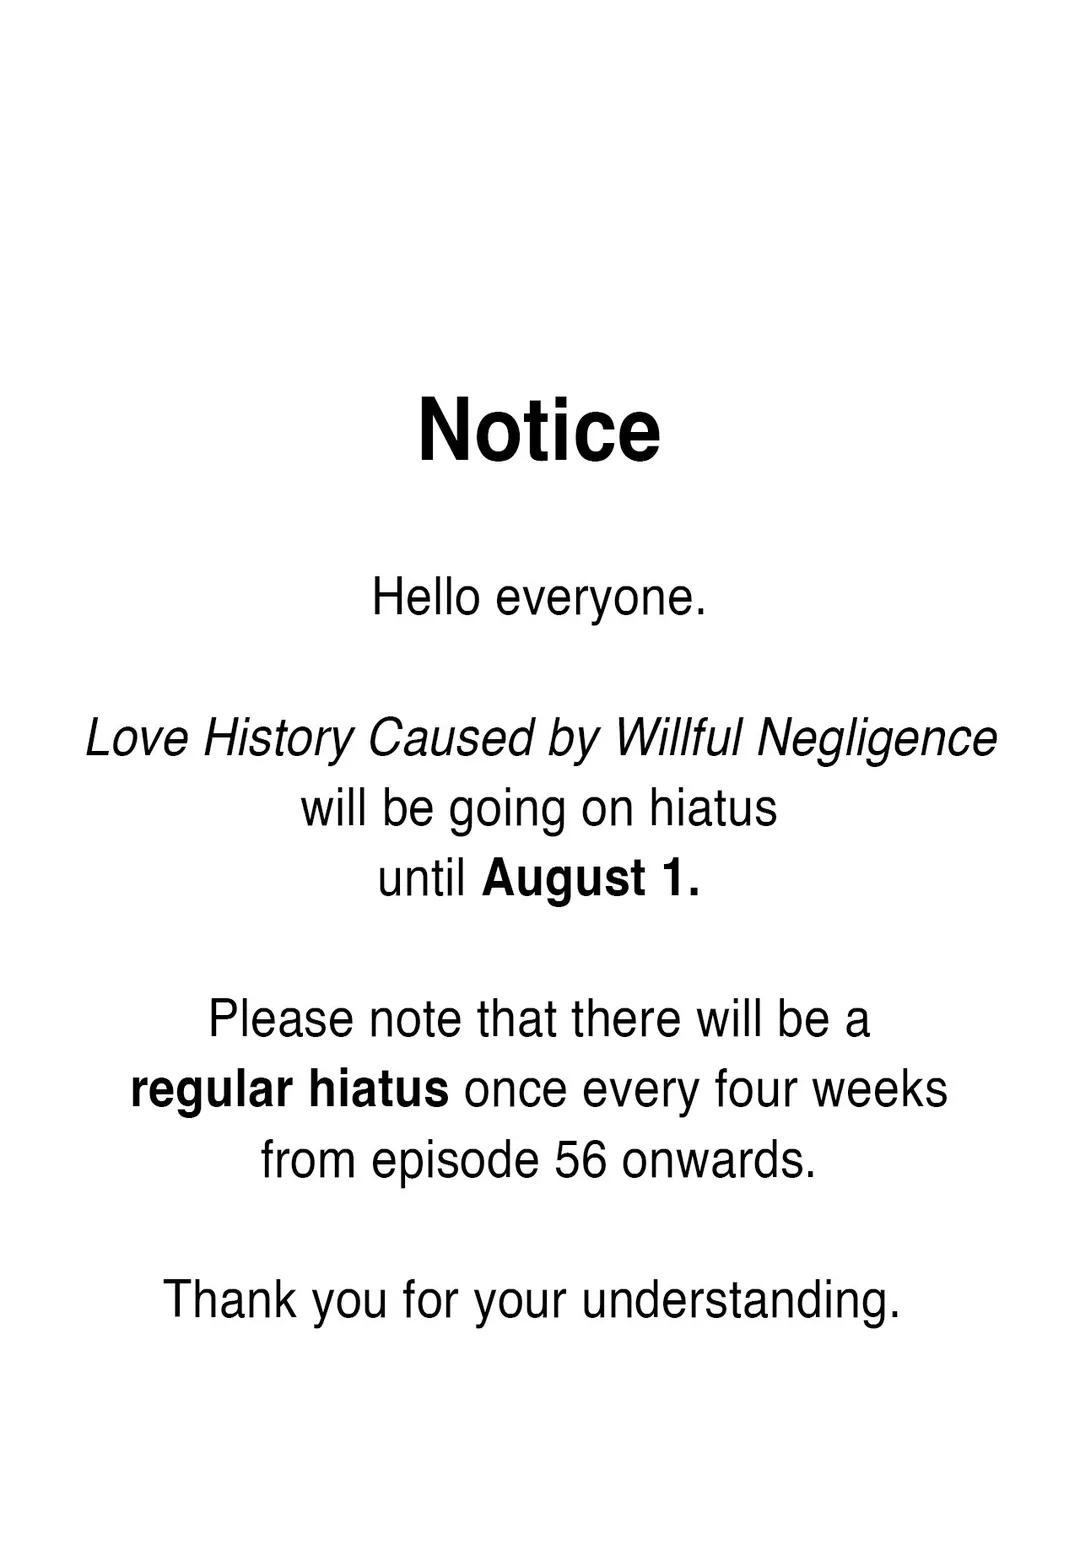 Love History Caused By Willful Negligence Hitaus. : + New Schedule - Picture 1